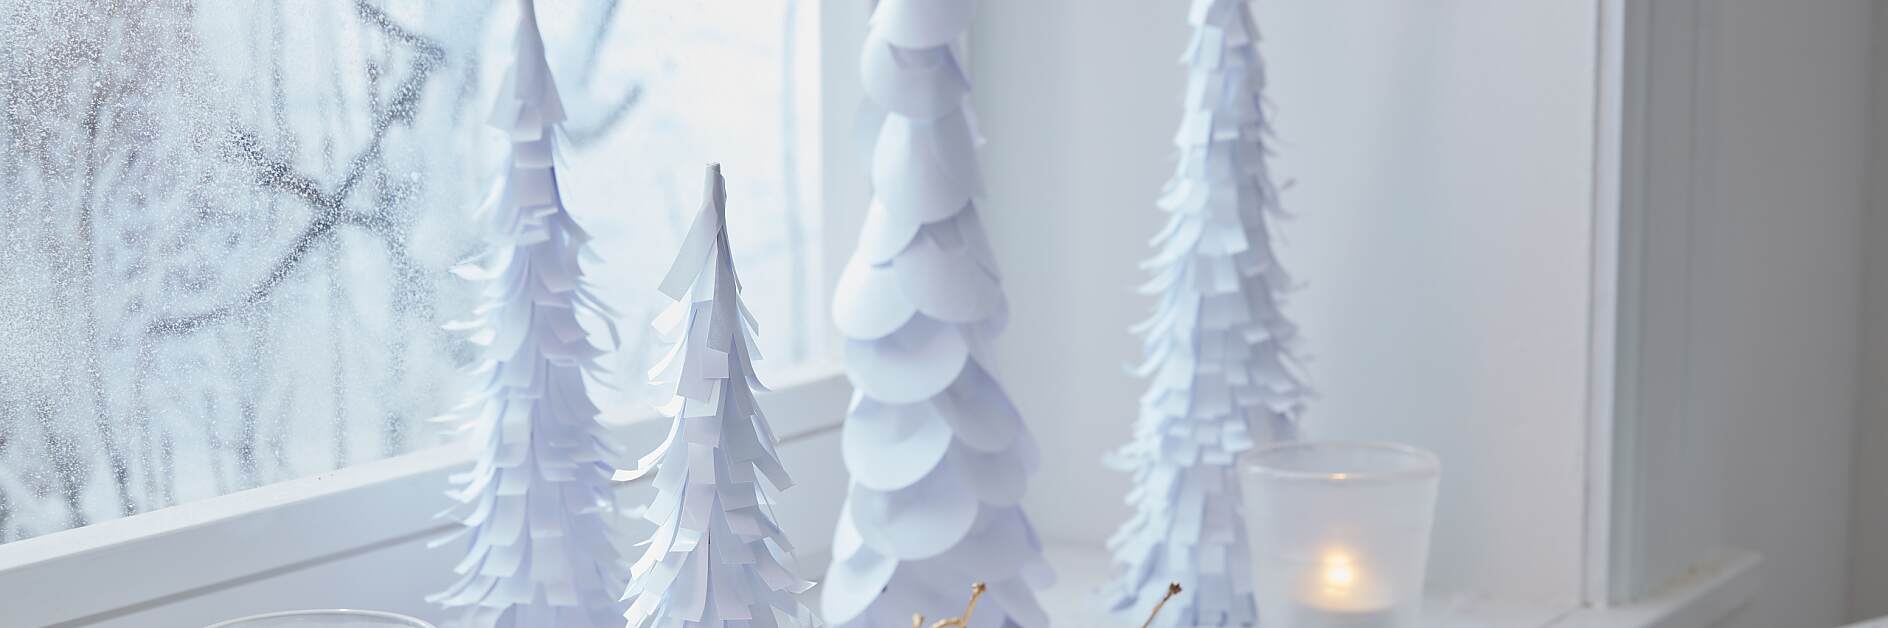 DIY paper trees for your home